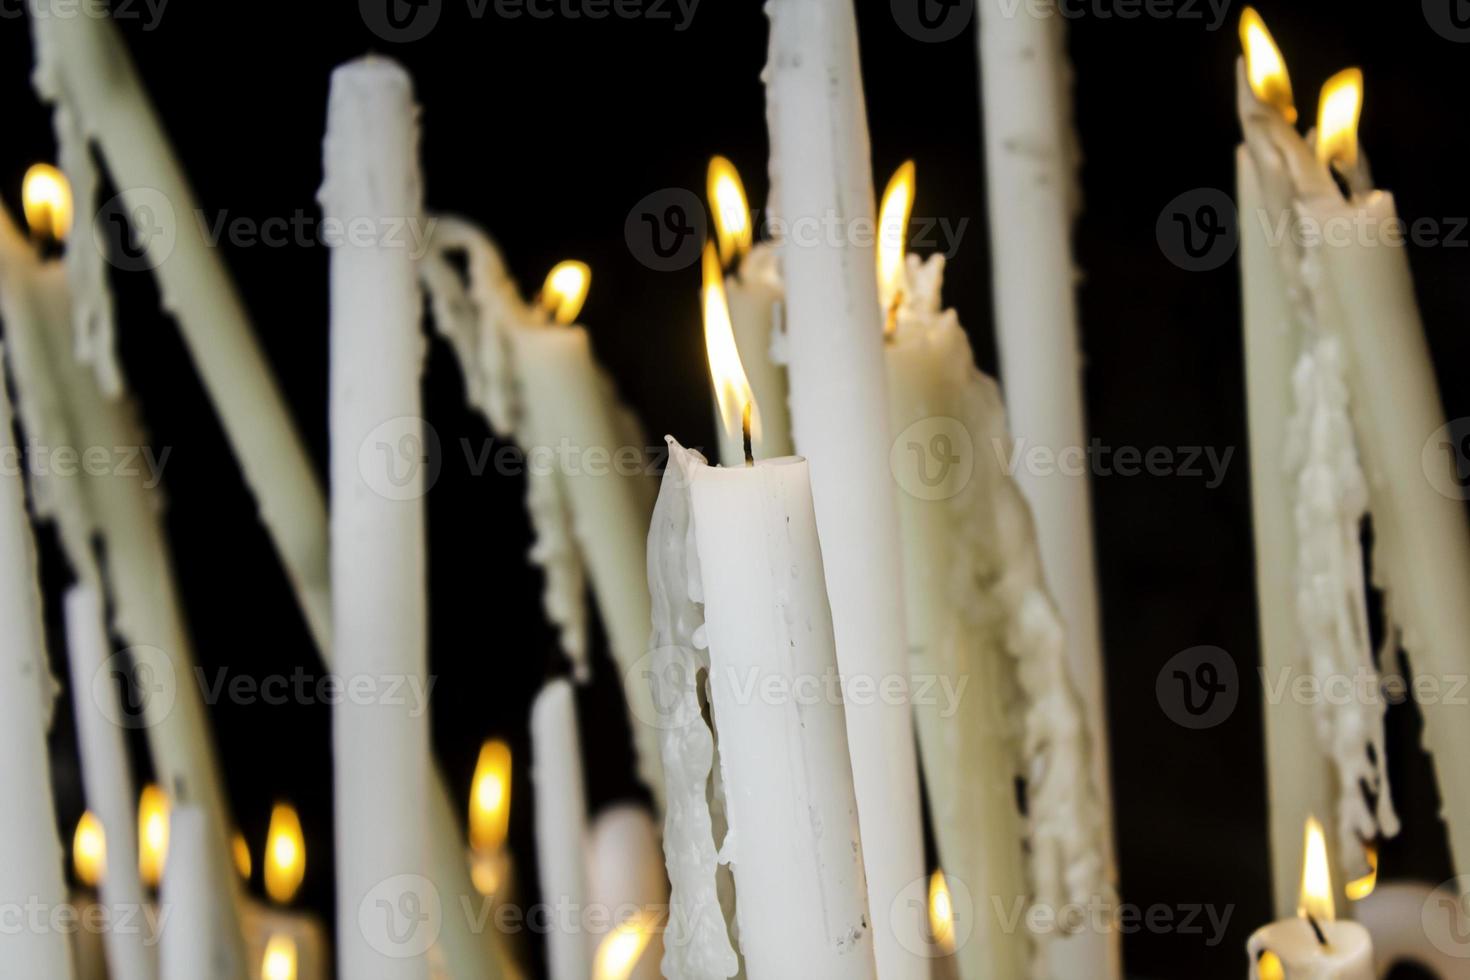 Wax candles lit with fire photo